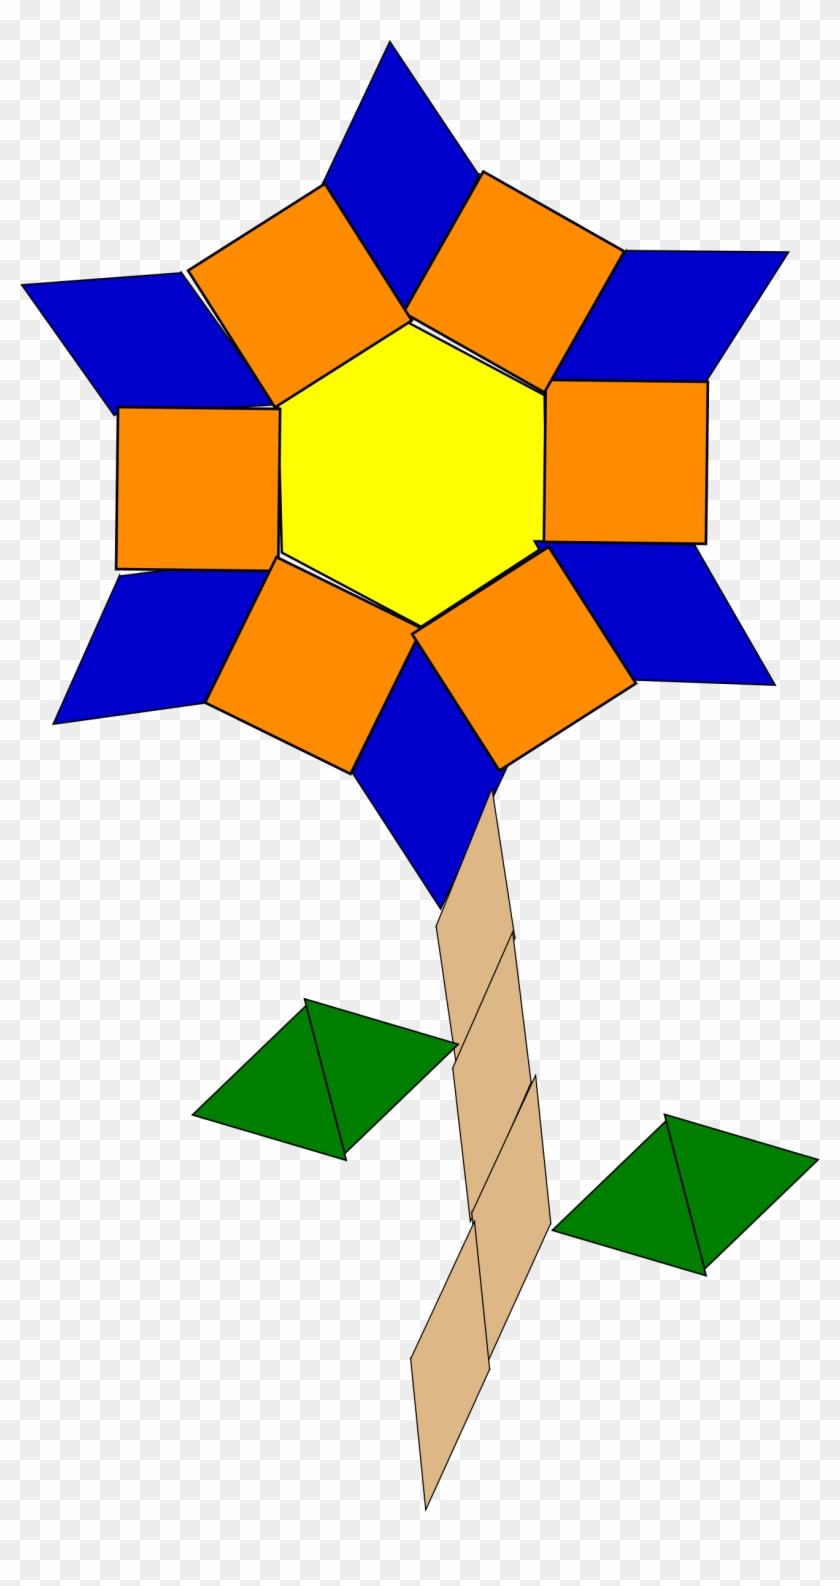 Flowers By @honylakiray, A Geometric Flower, On @openclipart - Flower Made Of Shapes #371918